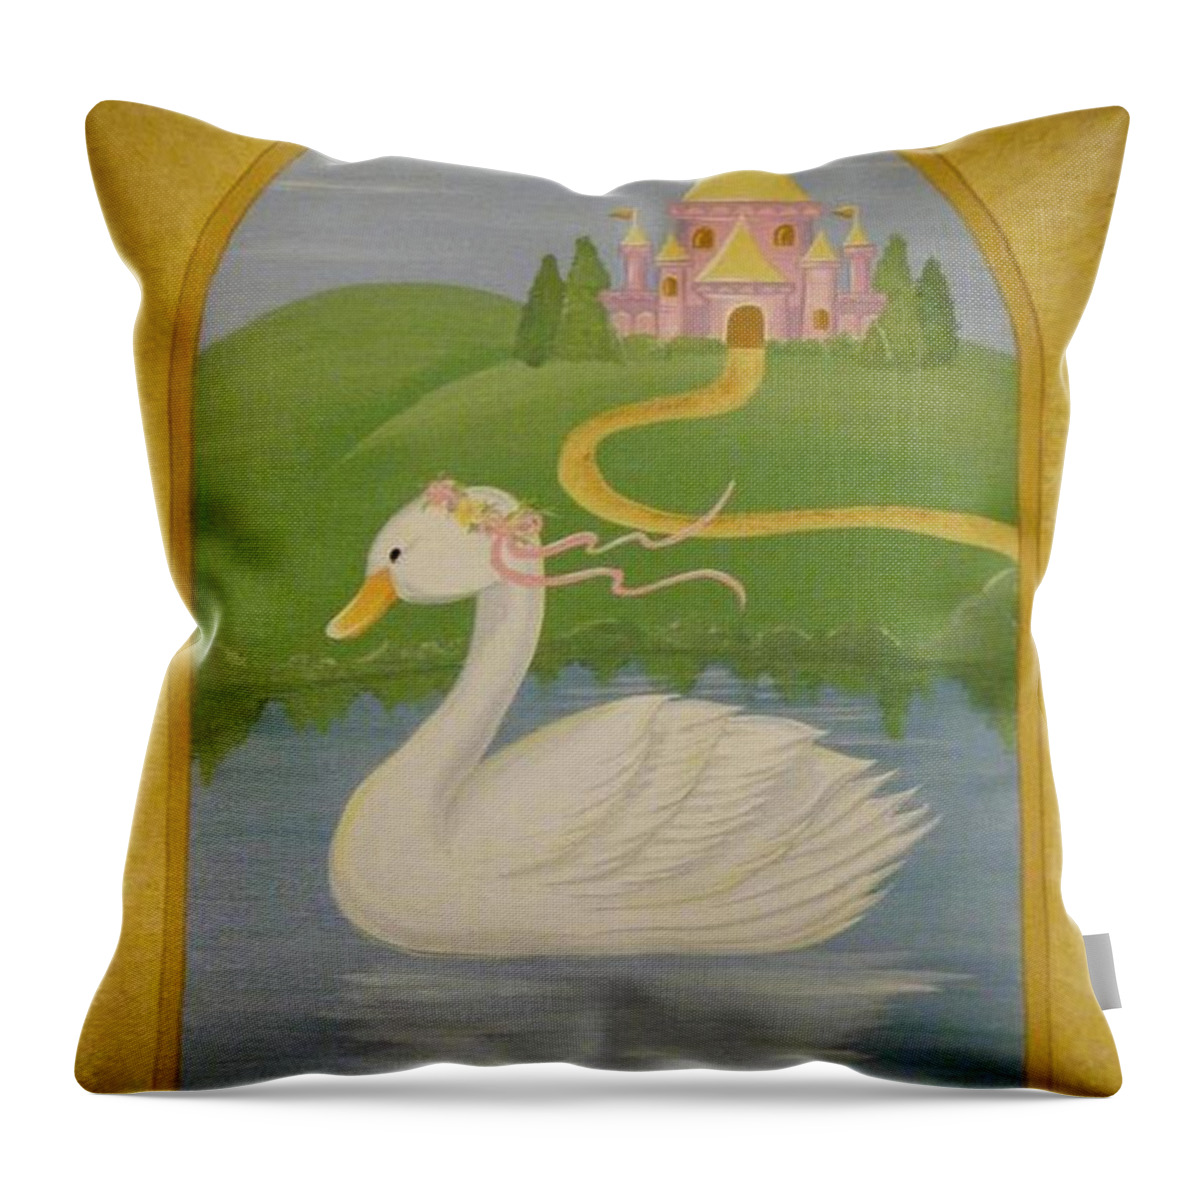 Swan Throw Pillow featuring the painting The Princess Swan by Valerie Carpenter